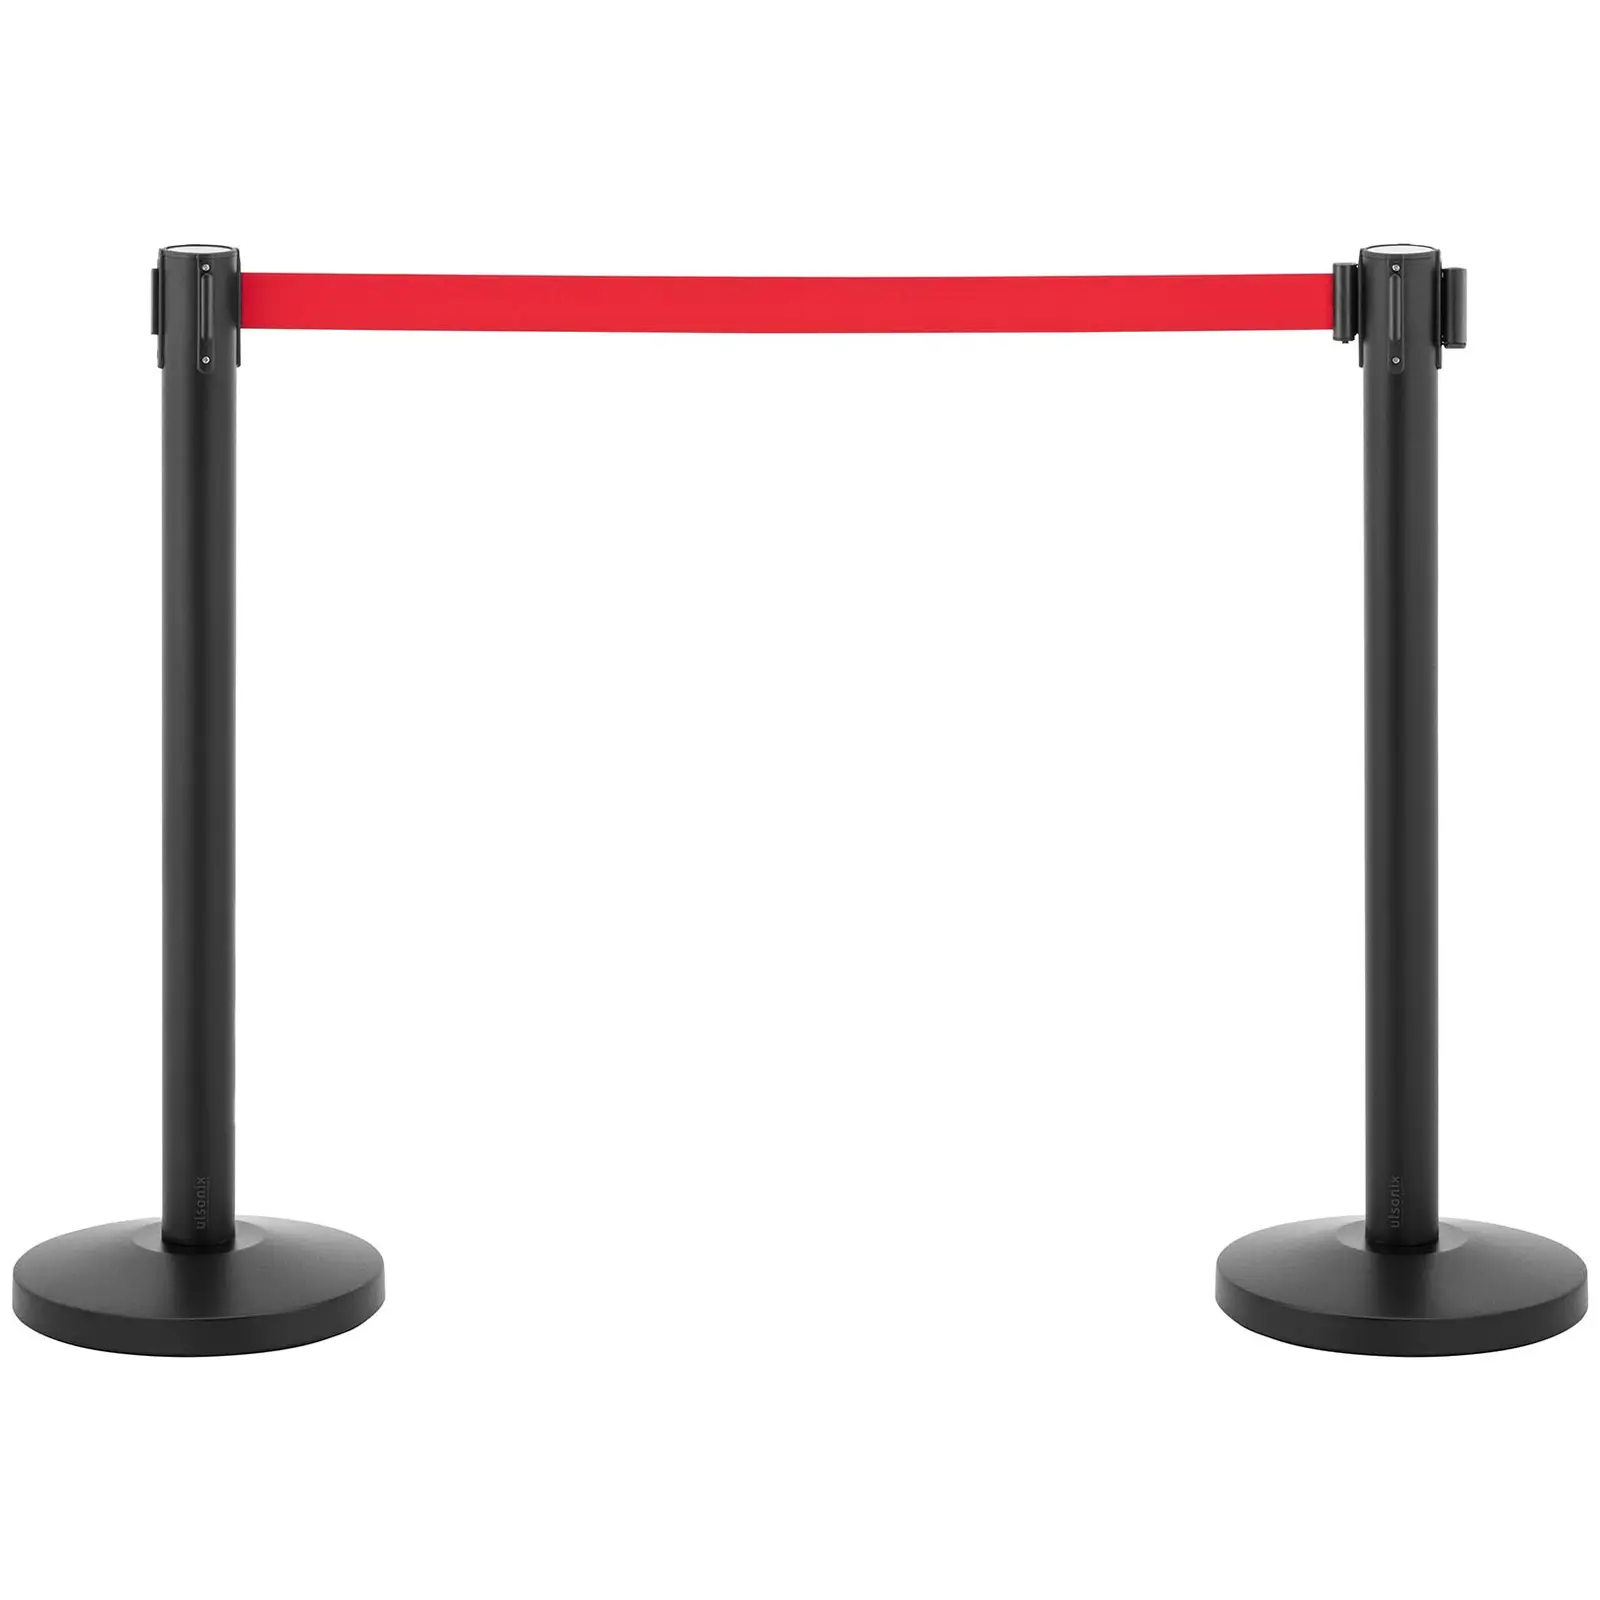 2 Barrier Posts - with strap - 200 cm - iron black coated